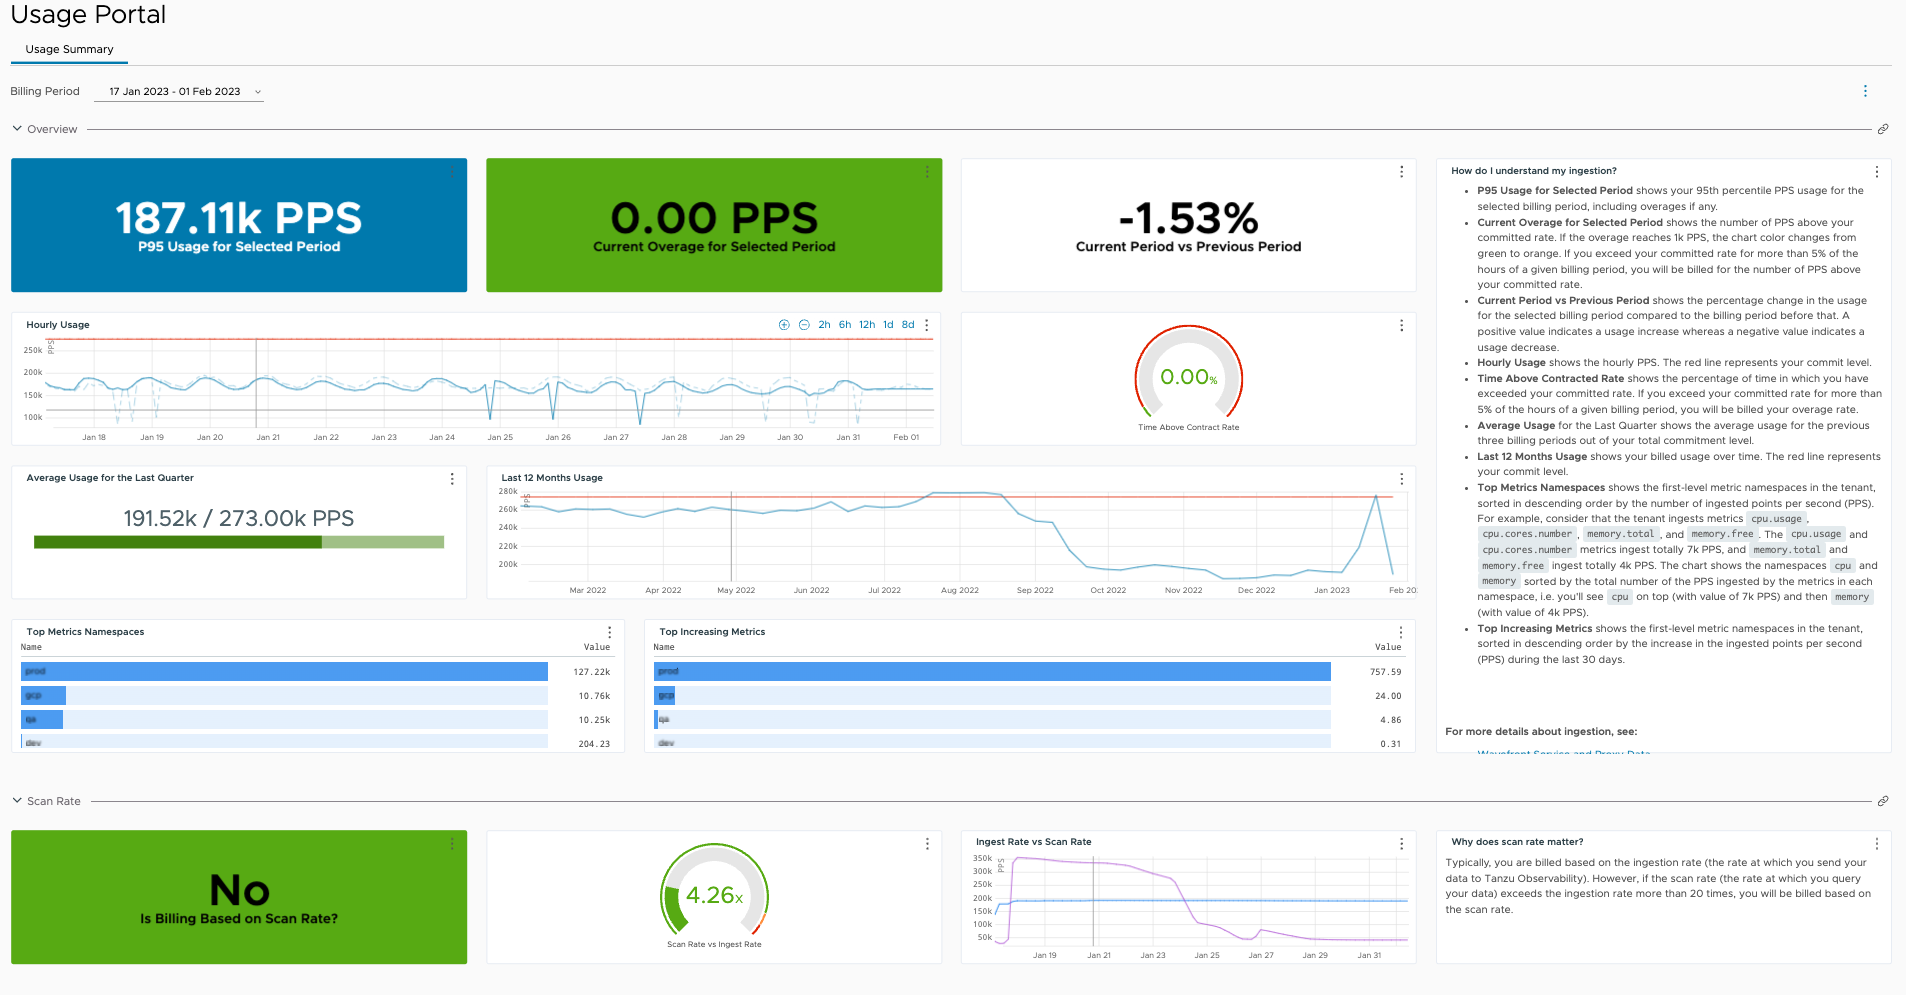 Example of the Usage Summary dashboard.